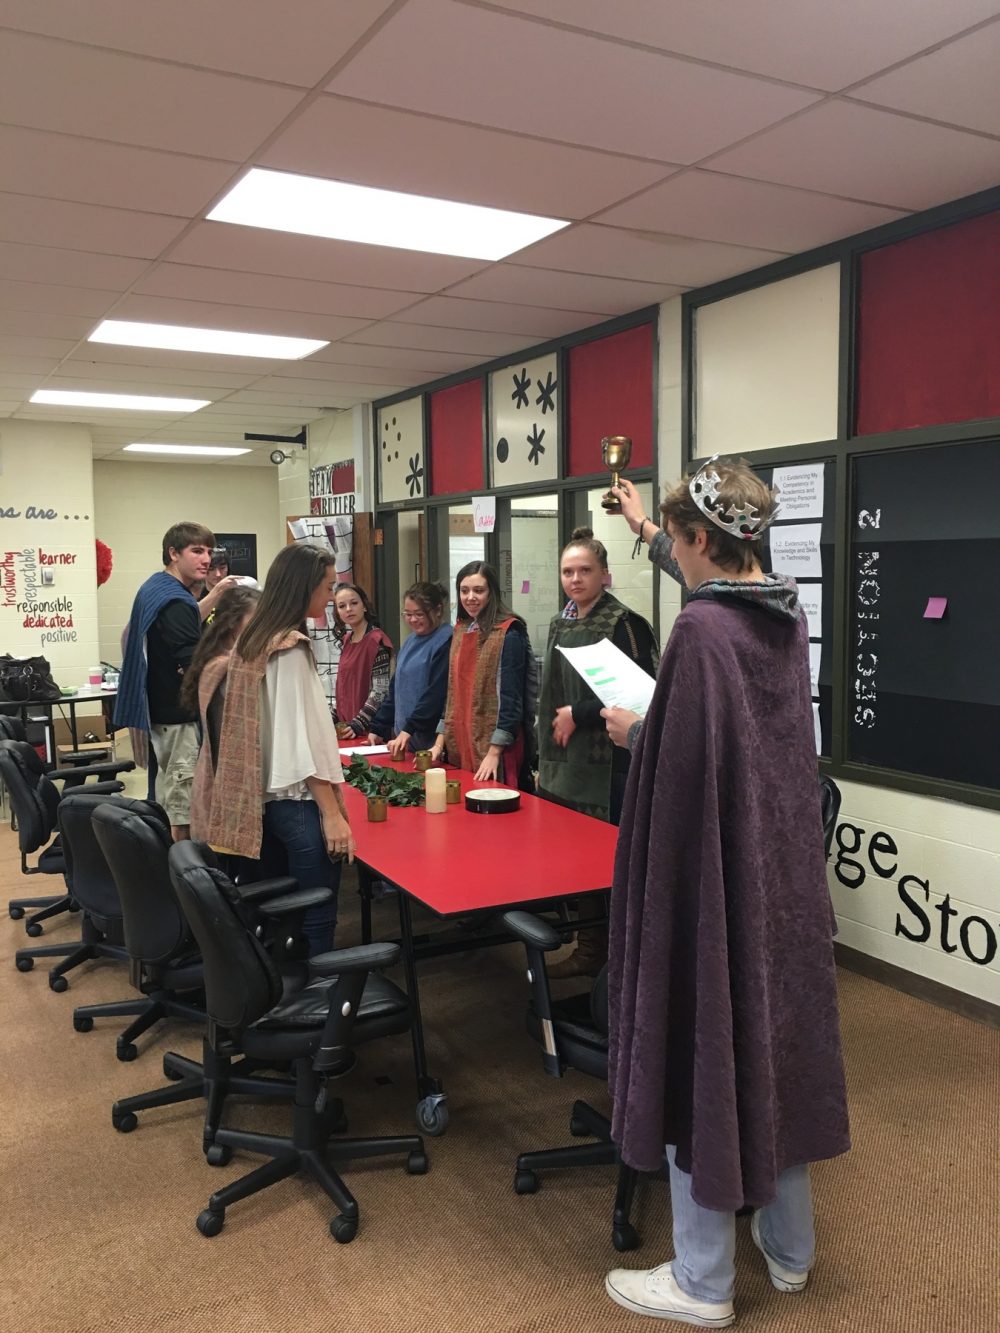 Students role playing with medieval outfits